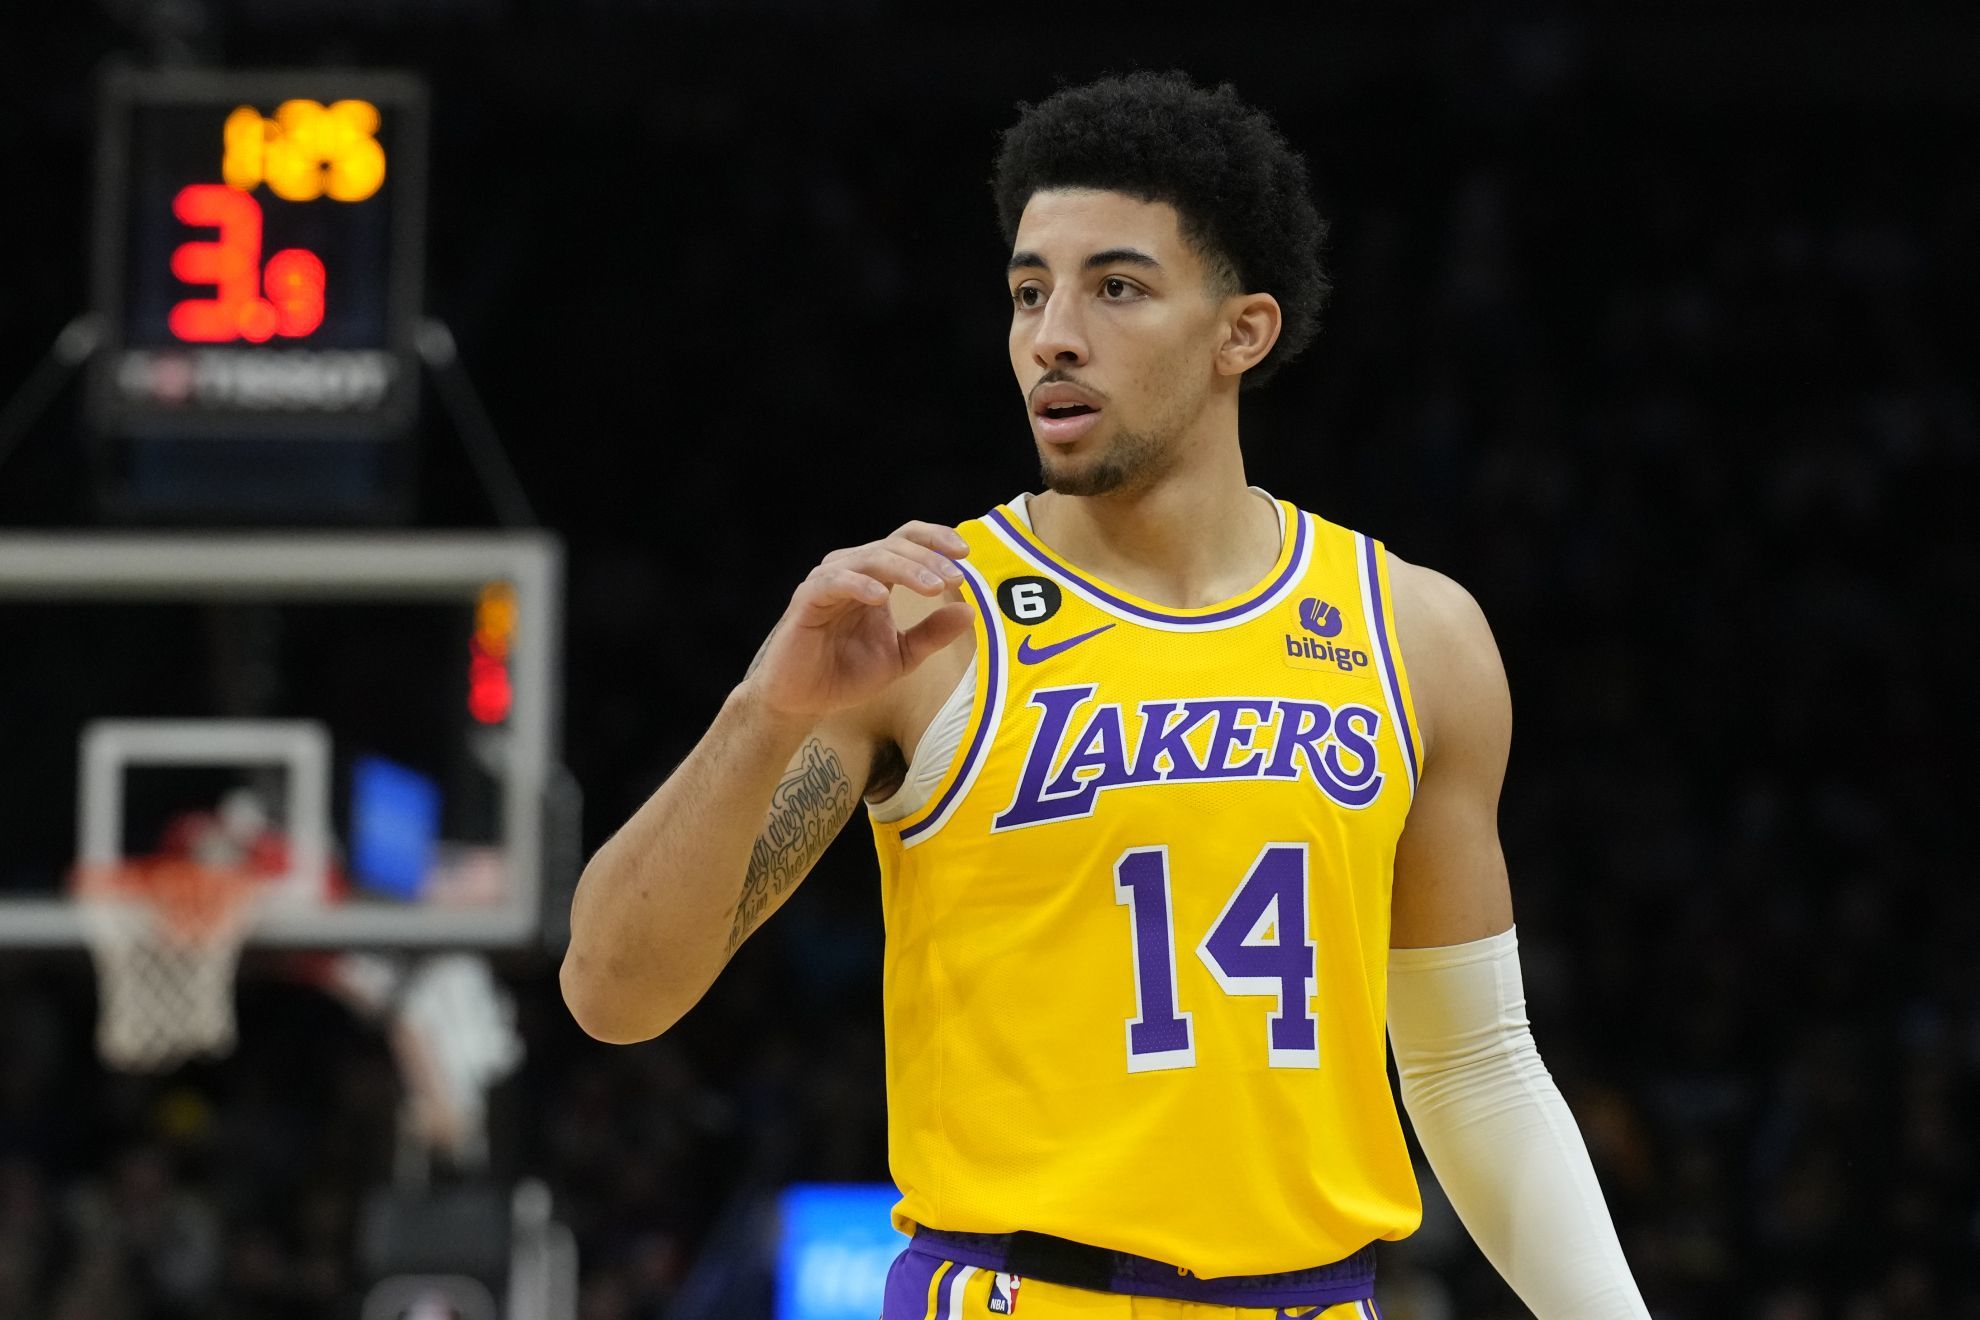 Lakers News - Latest Los Angeles Lakers News, Stats & Rumors